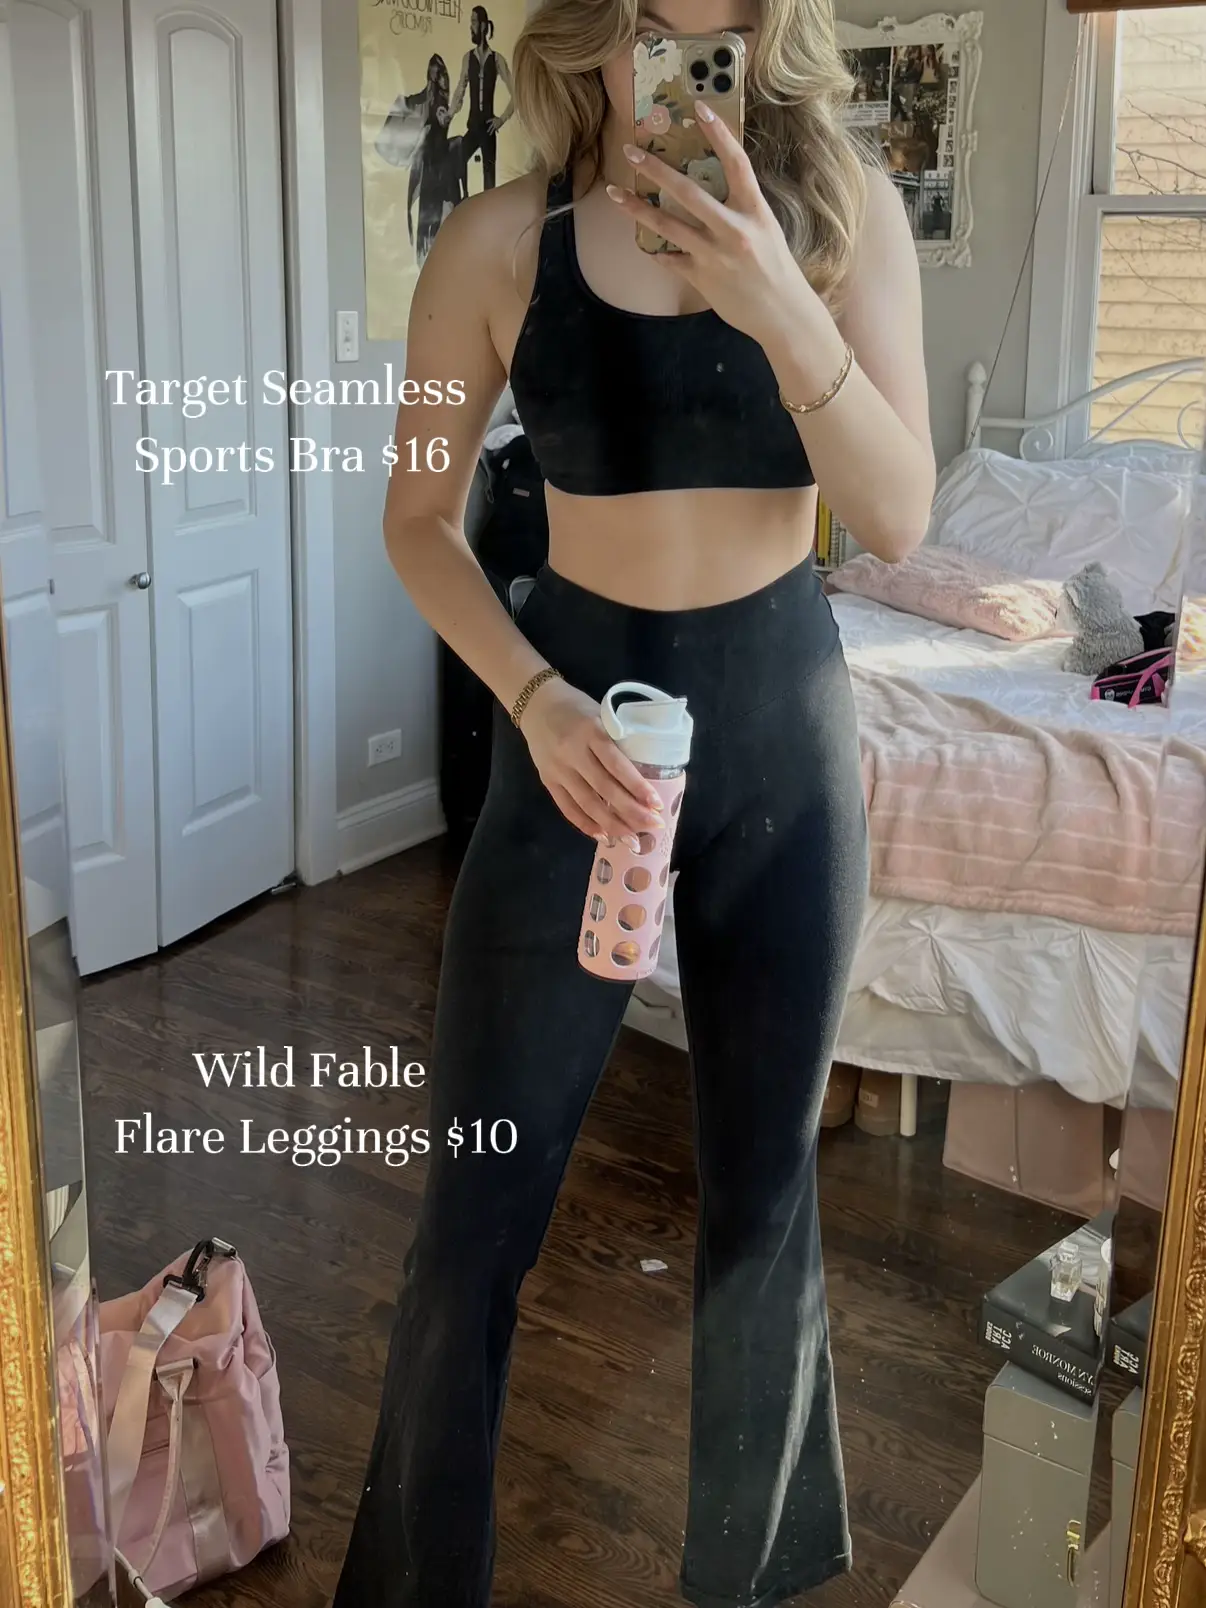 pink-themed activewear ideas!🌸, Gallery posted by michelle.belle